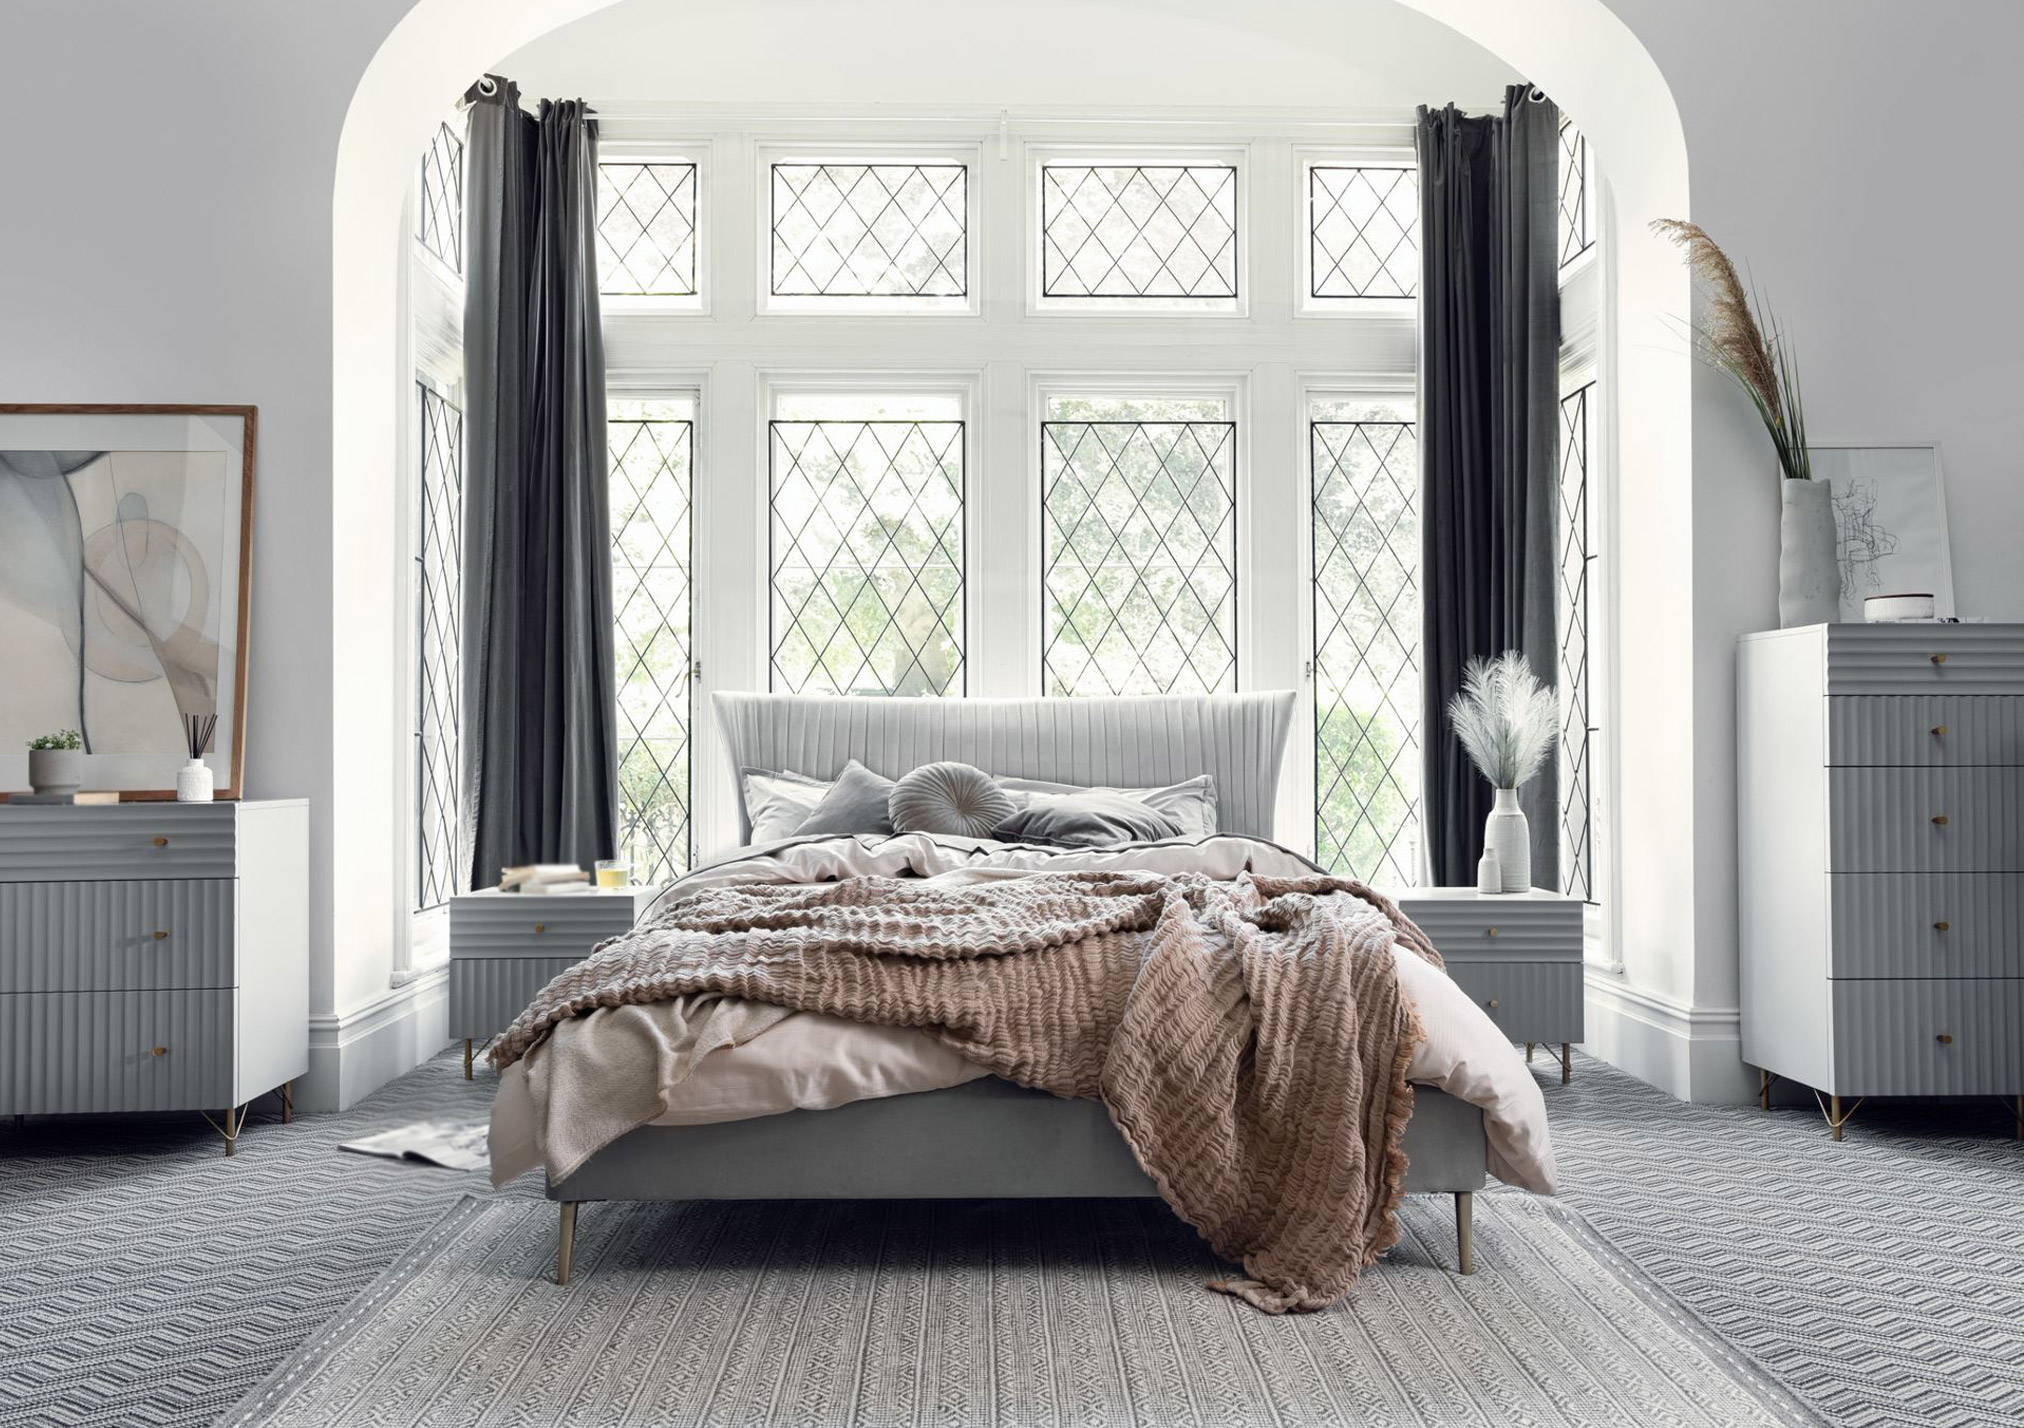 Upgrade Your Bedroom Decor With The Starbeck Collection - Bedroom Furniture In Norwich